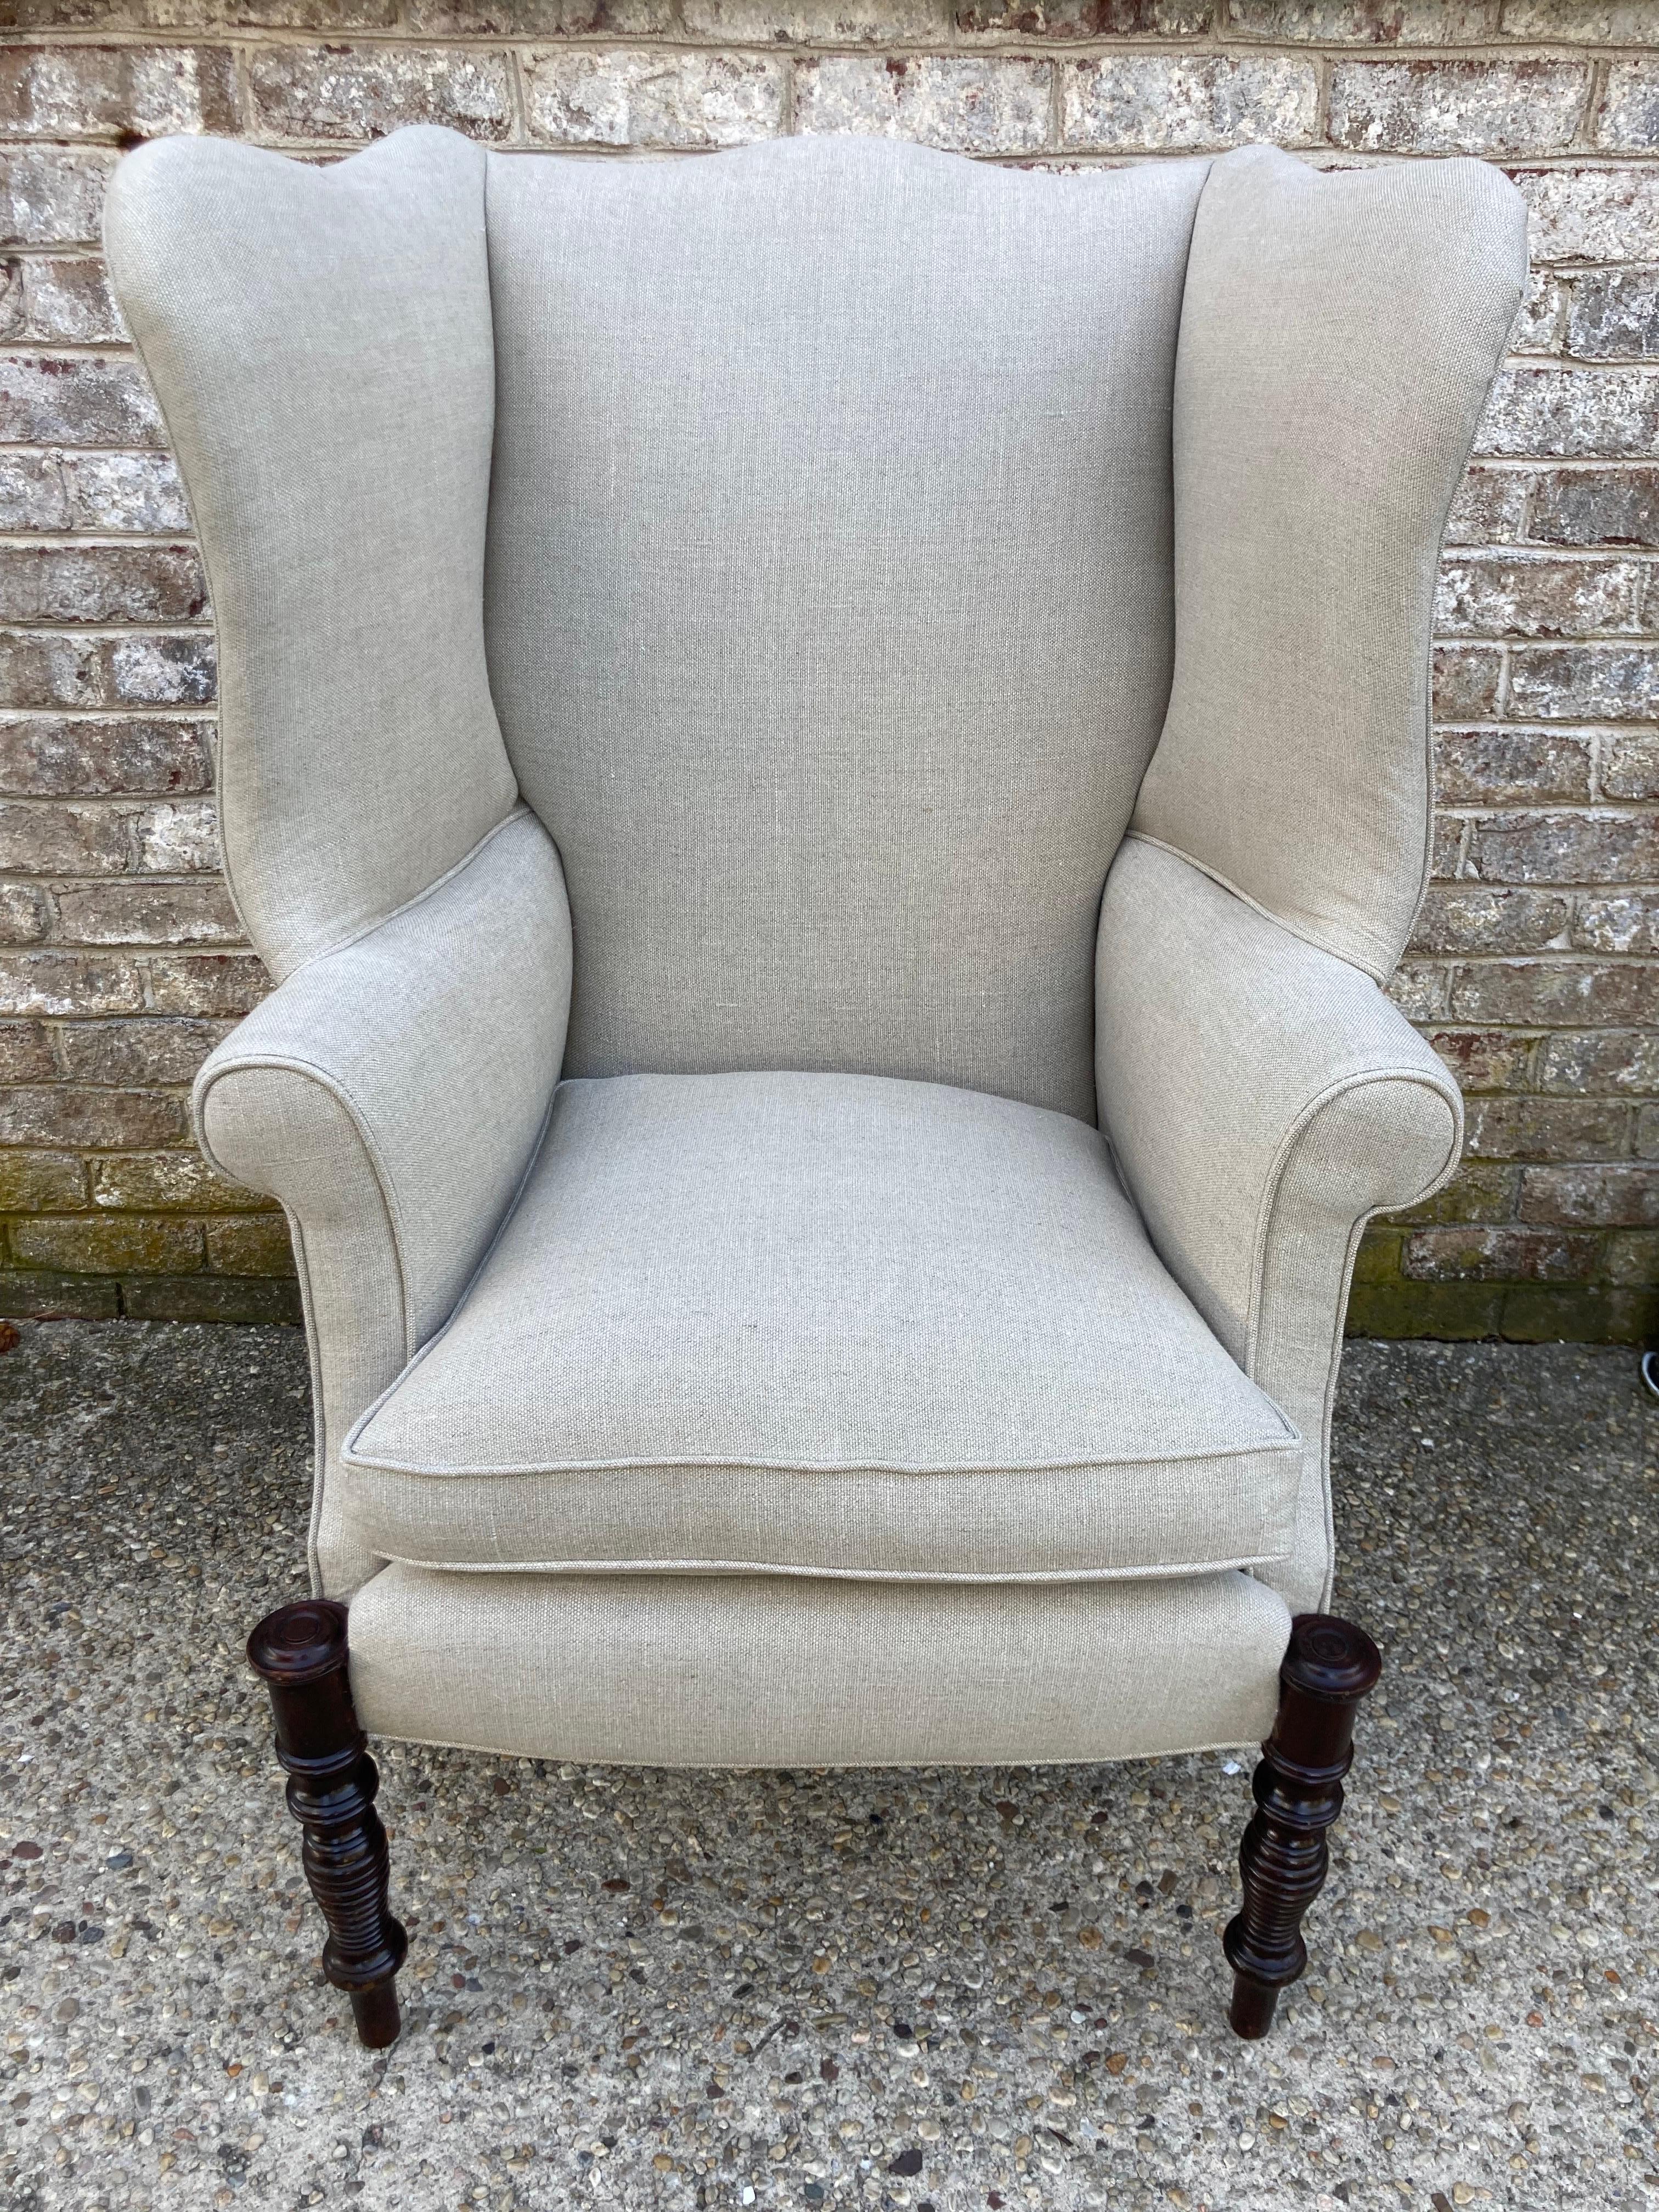 Antique Federal style wingback chair with interesting turned wood front legs. Newly reupholstered in natural linen with newly down wrapped seat cushion.